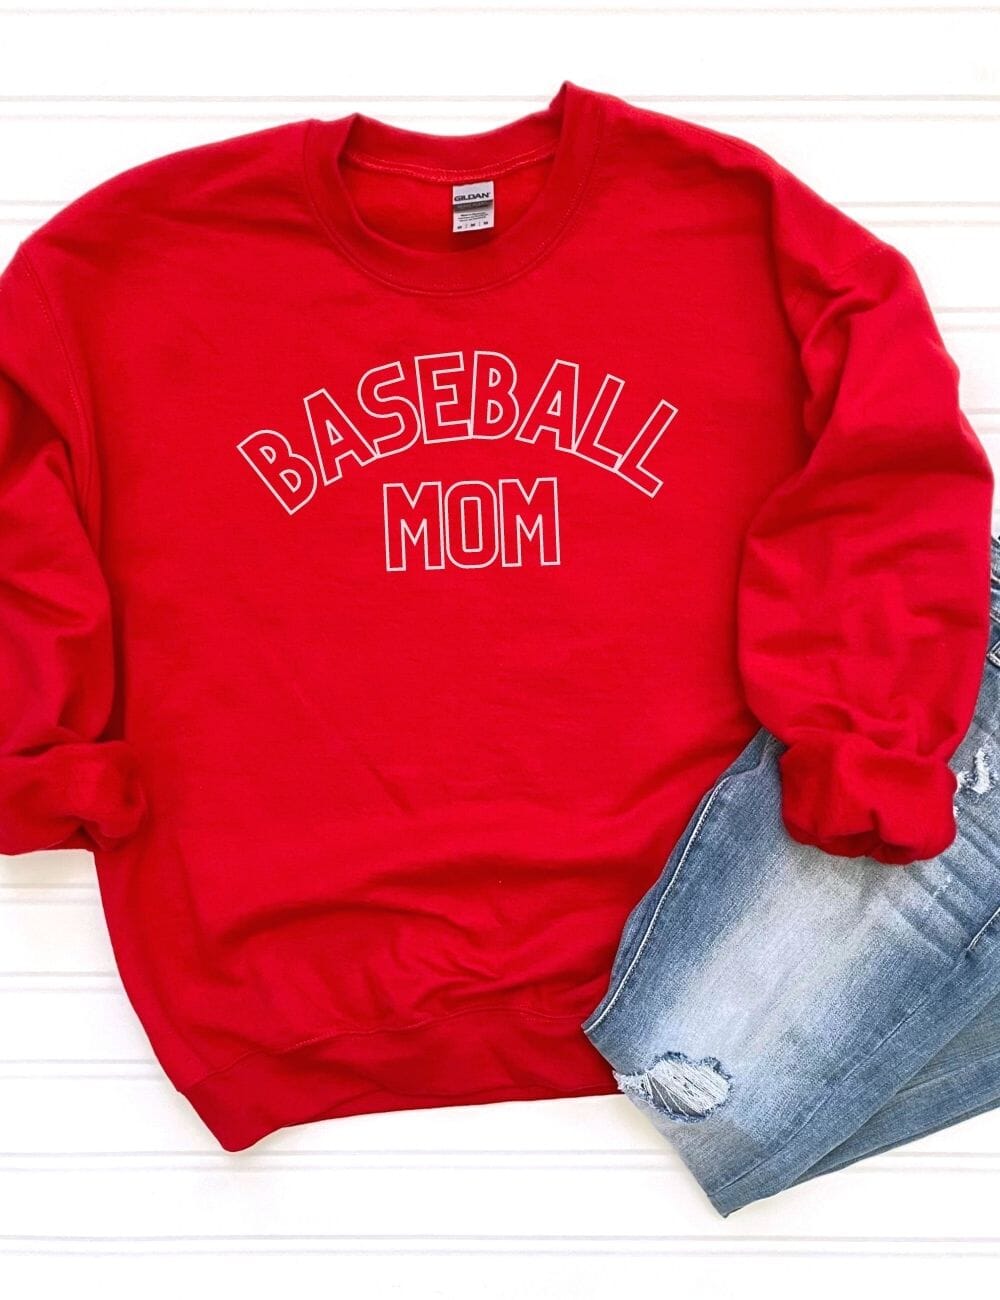 Sports Graphic T-Shirts, Sweatshirts, & More for Sports Moms